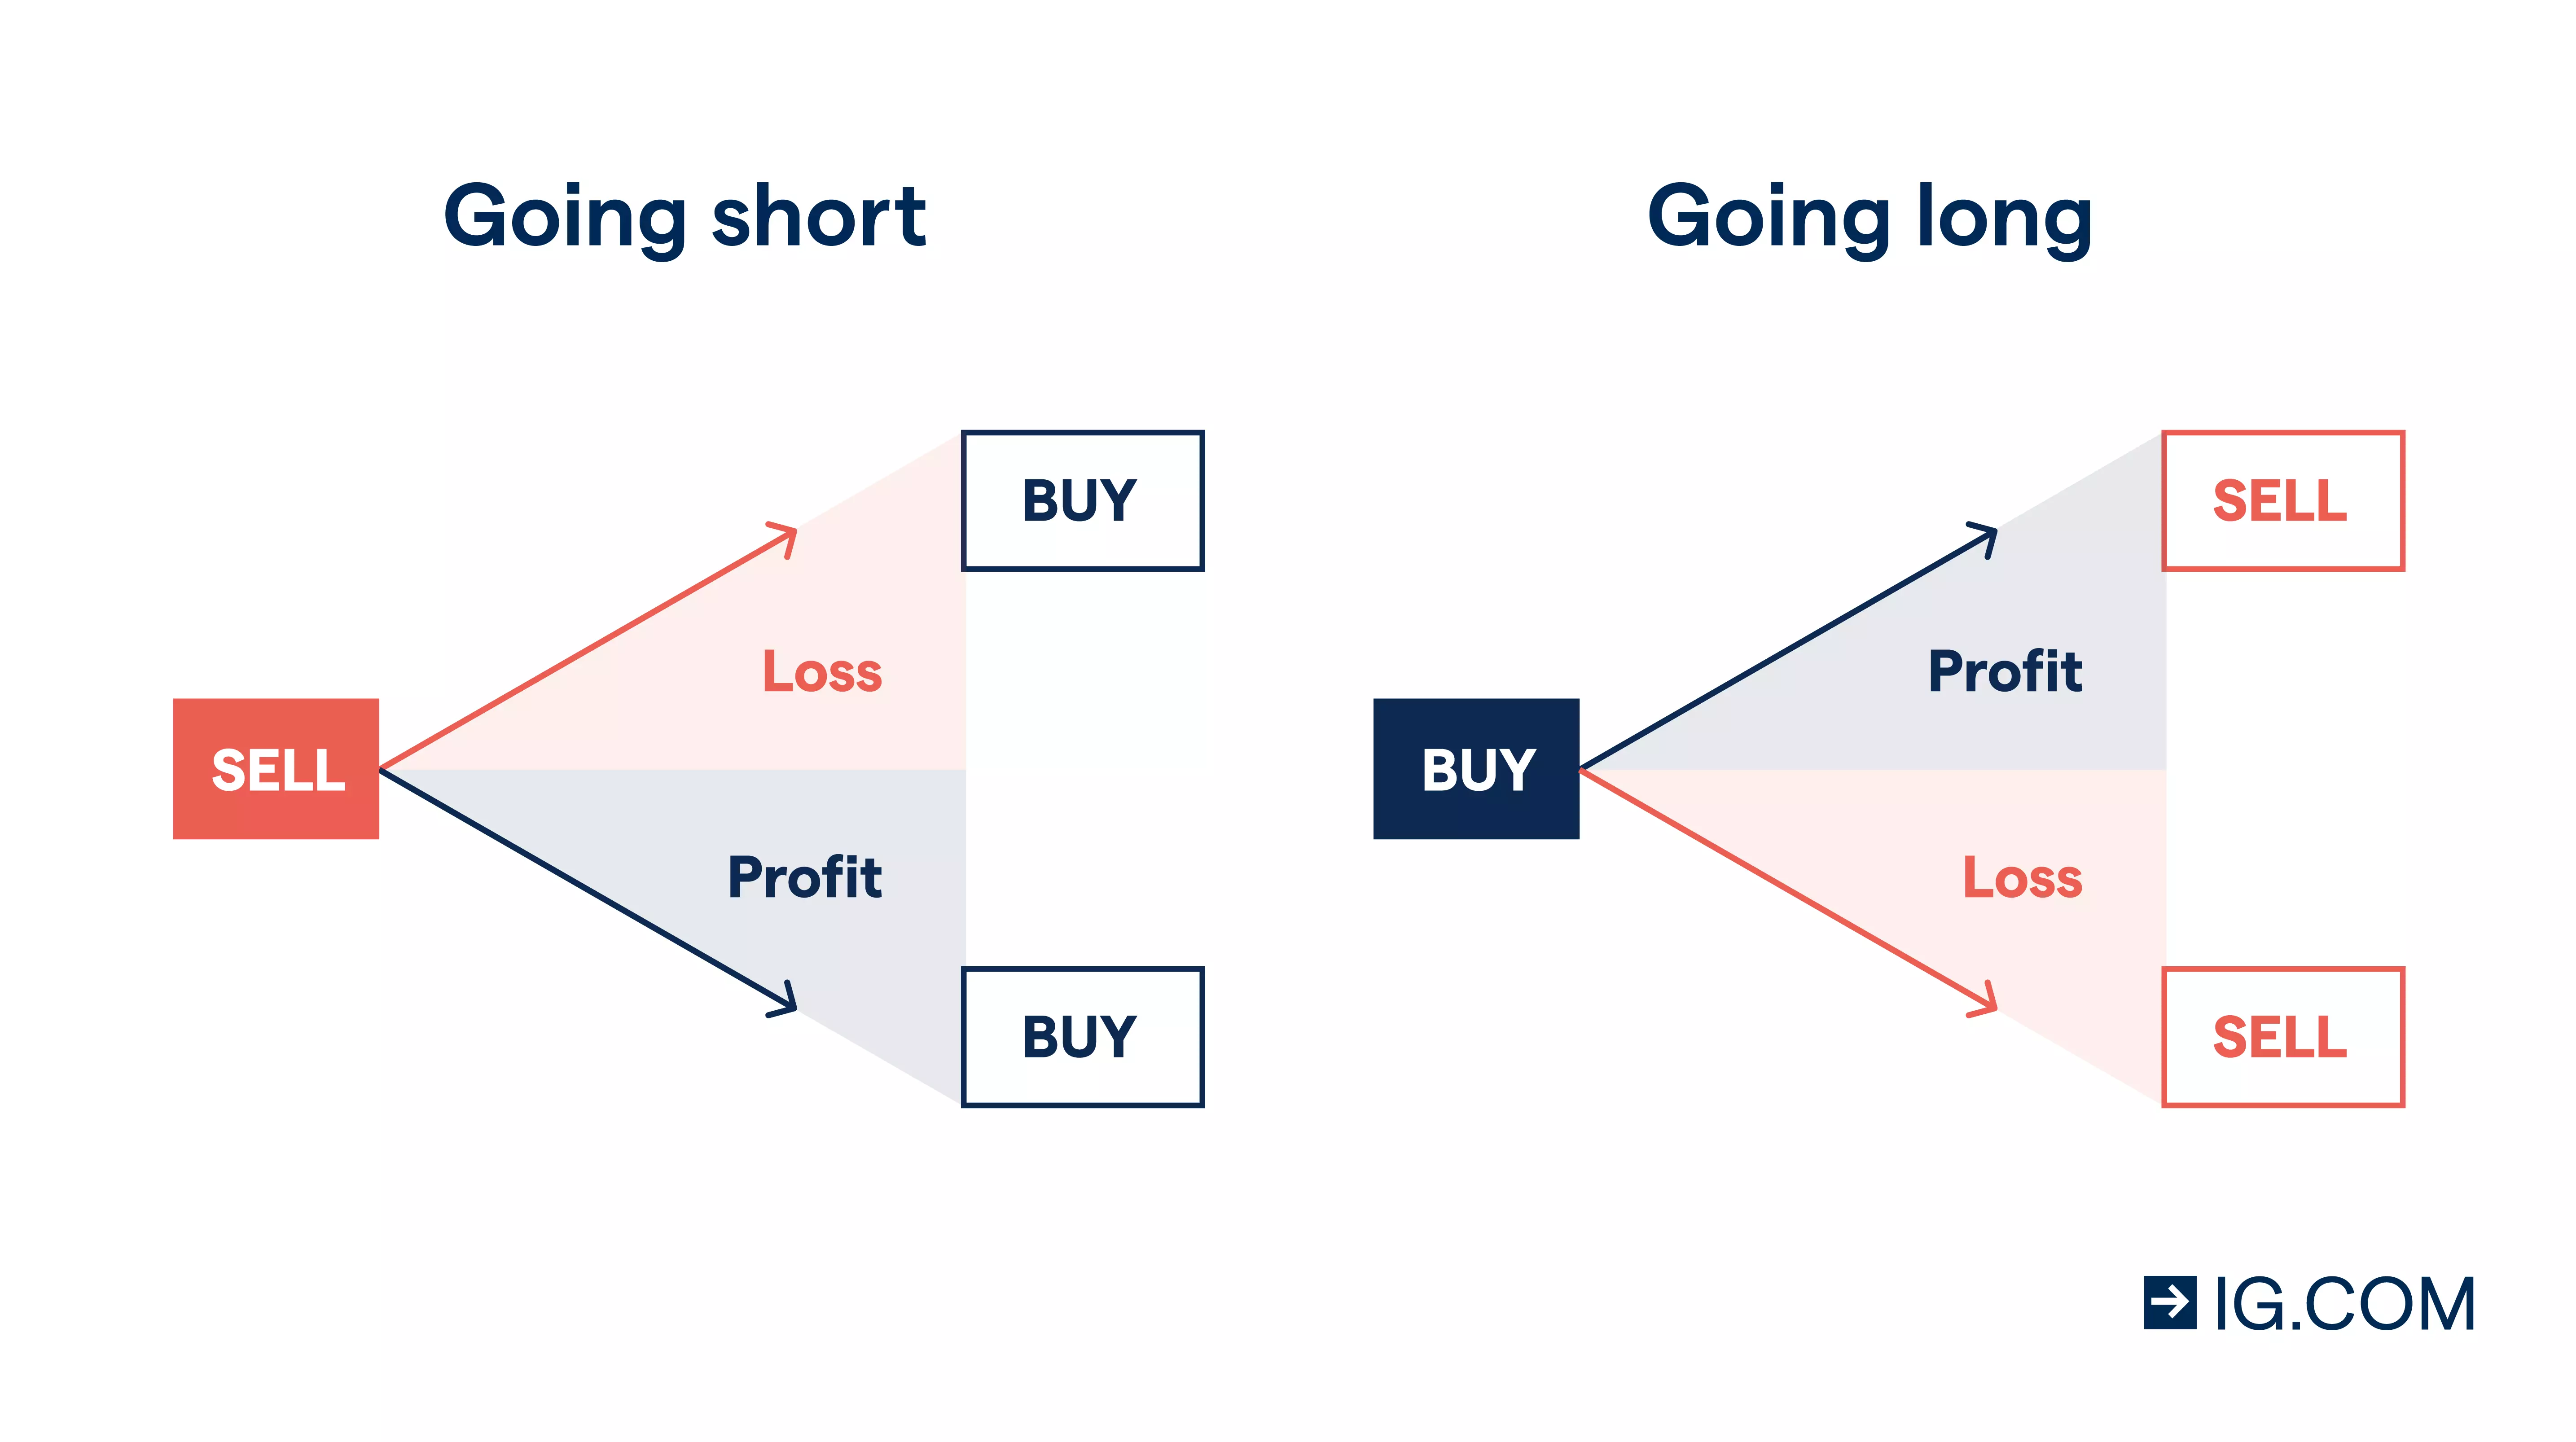 Image showing the how a profit is made and how loss is incurred when you go long by buying or go short through selling an asset.